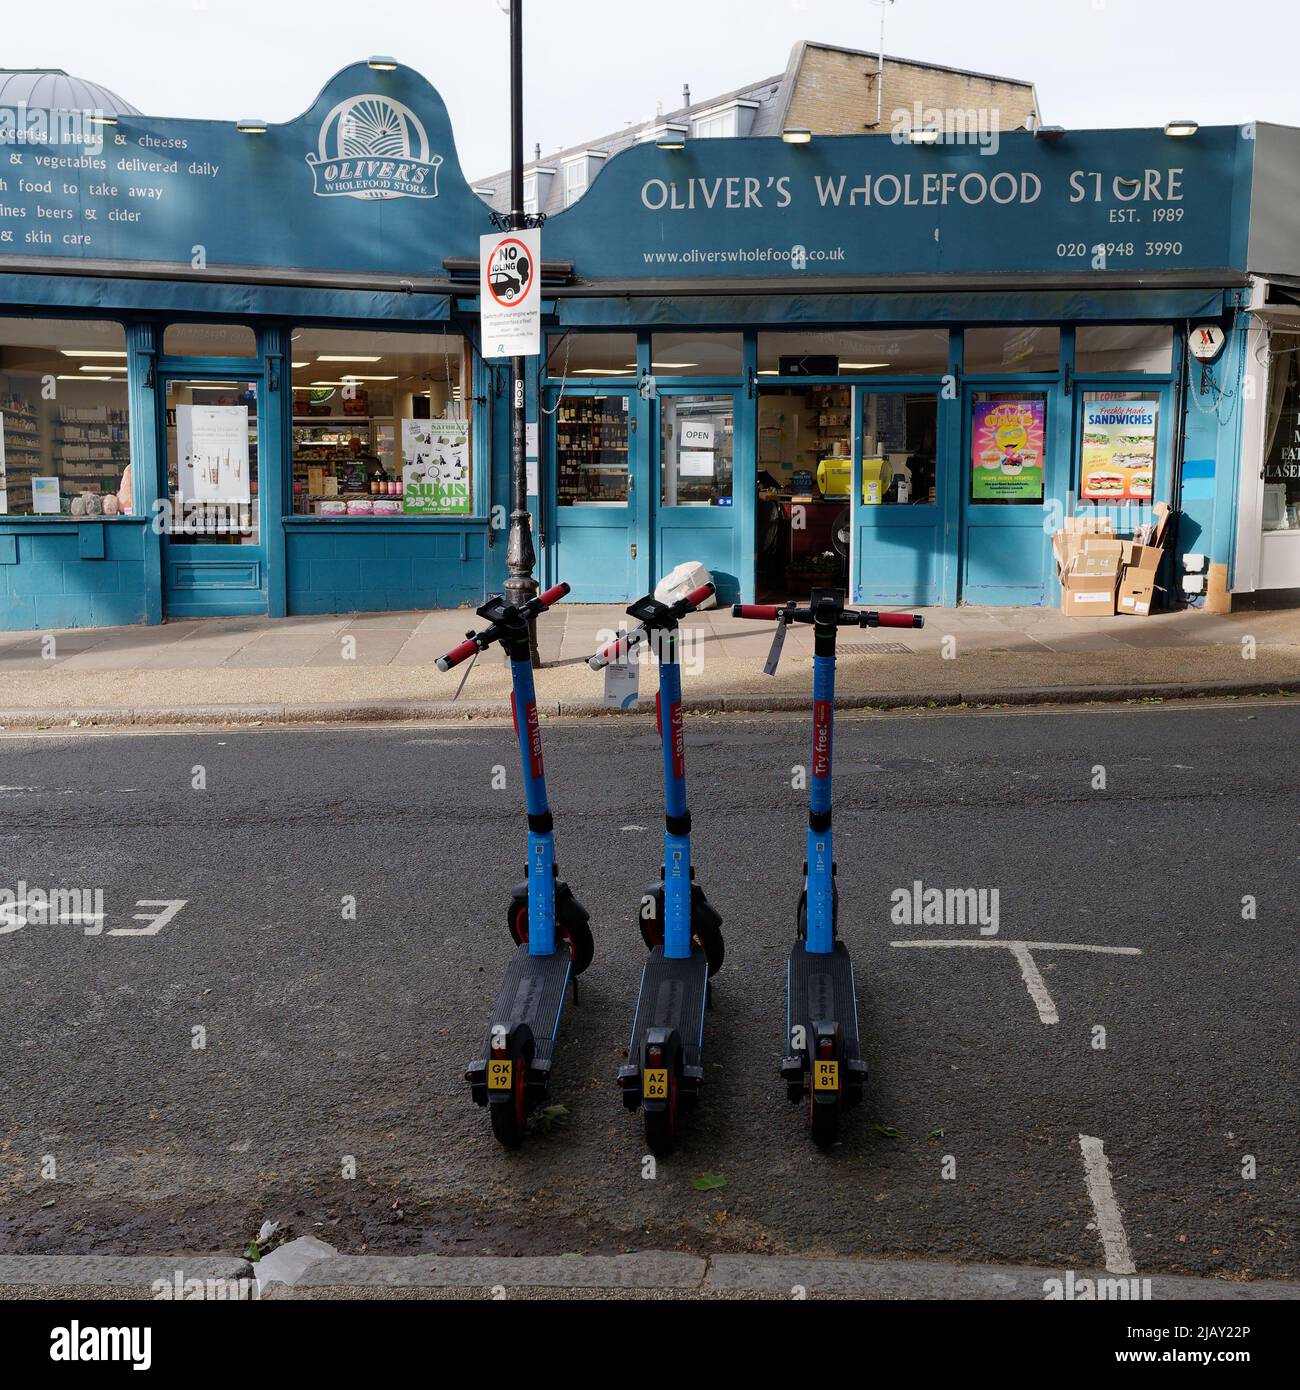 Kew, Greater London, England, May 18 2022: Try Free escooters outside Oliver's Wholefood Store. Stock Photo